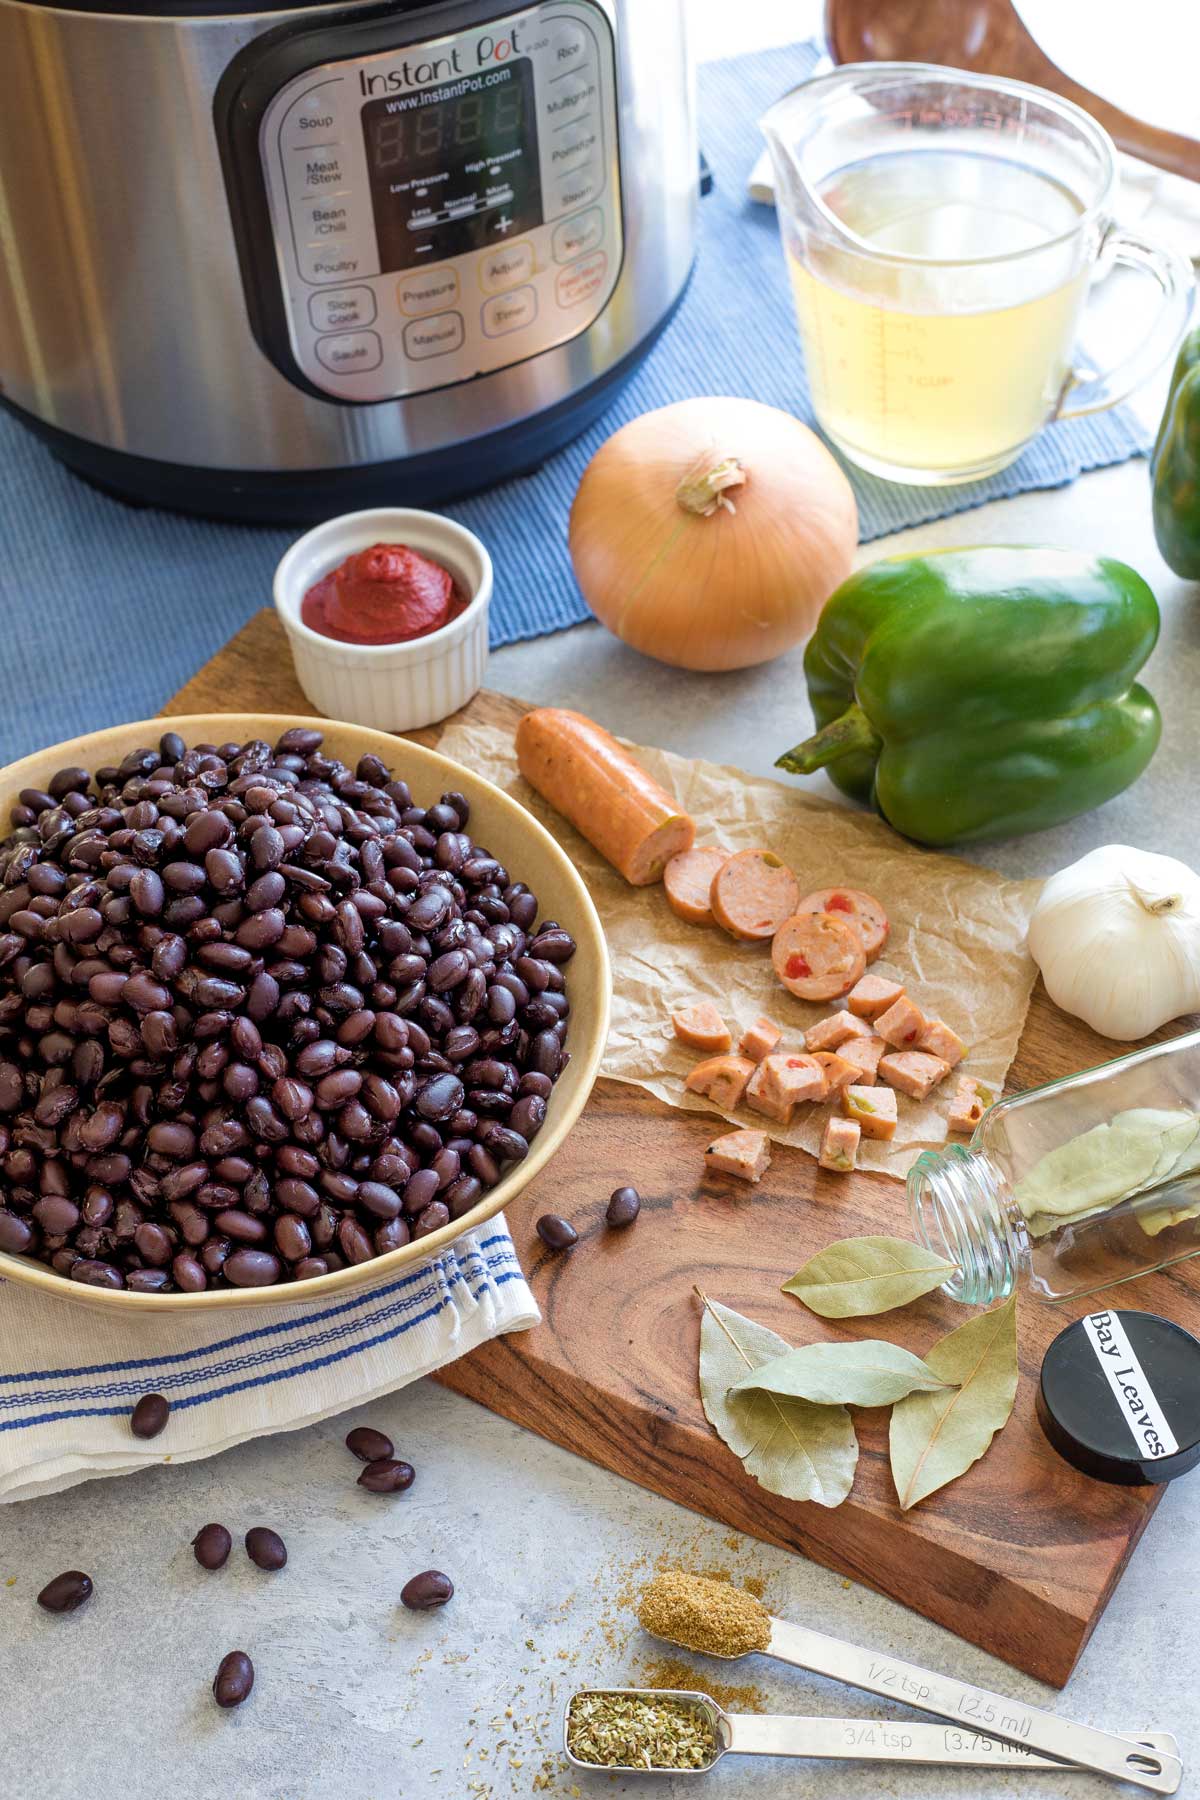 Recipe ingredients like black beans, sausage and spices prepped on cutting board with Instant Pot waiting in background.